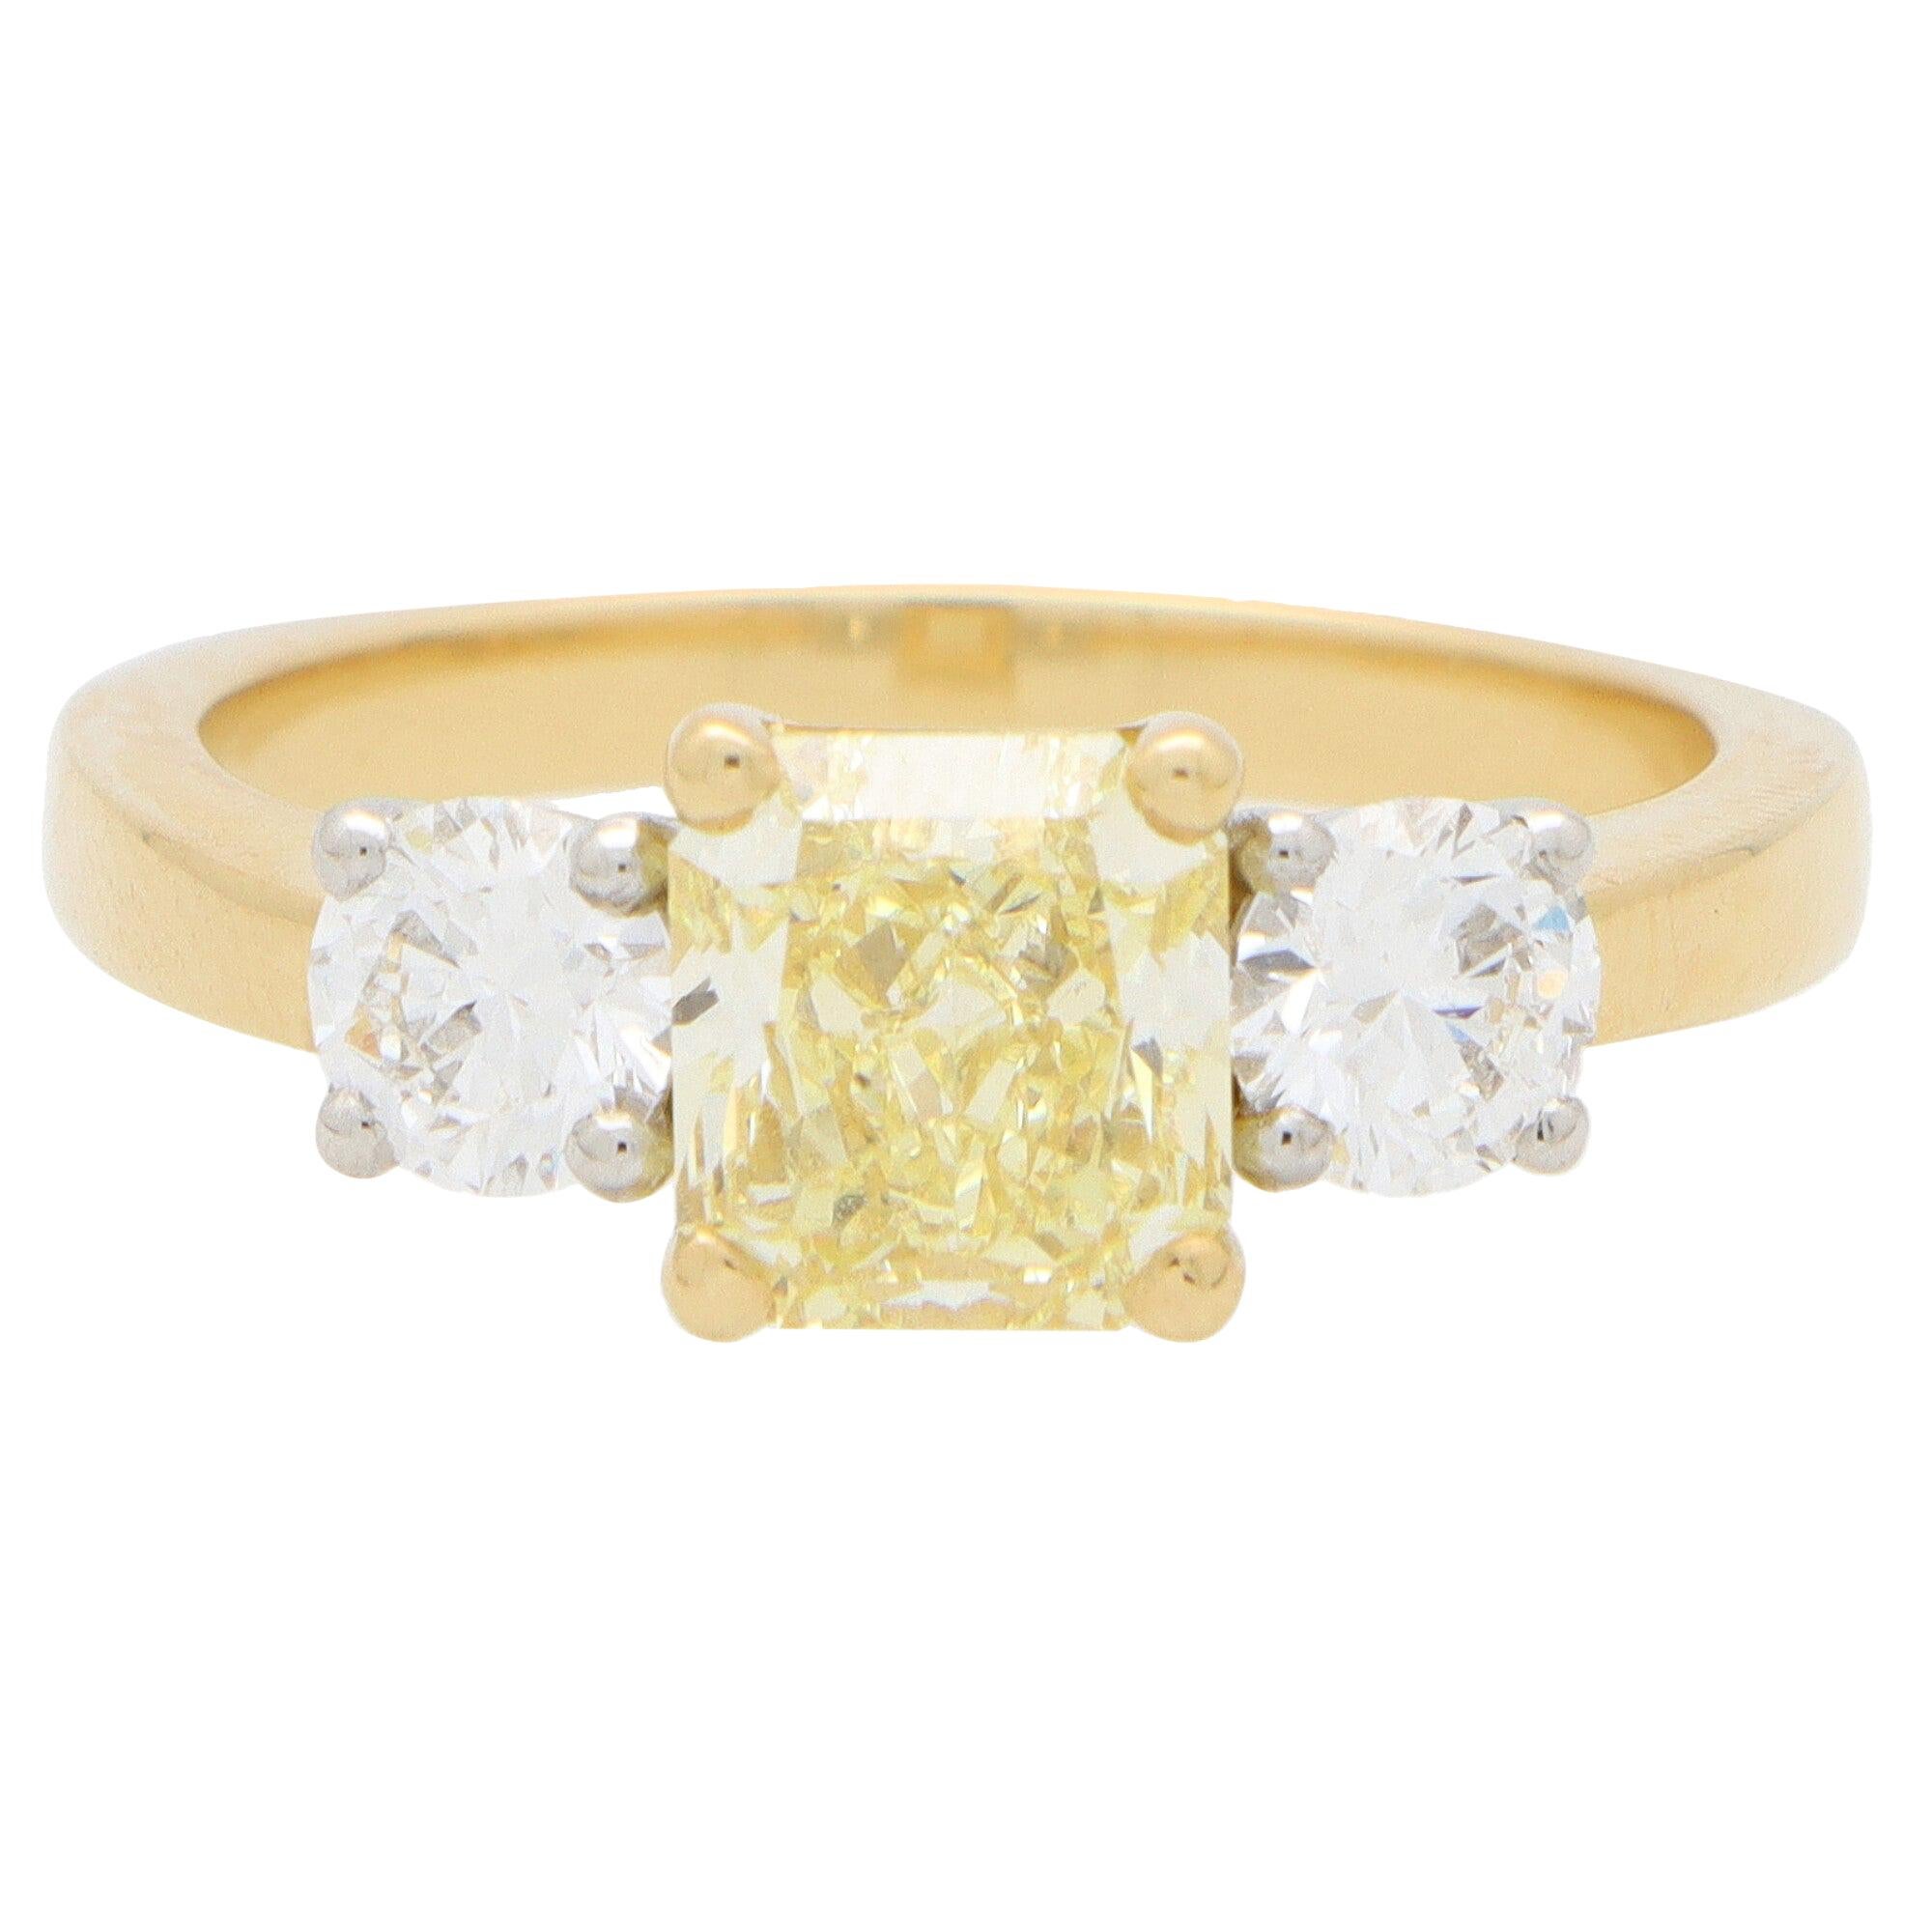 GIA Certified Fancy Yellow Diamond Three Stone Engagement Ring in 18k Gold